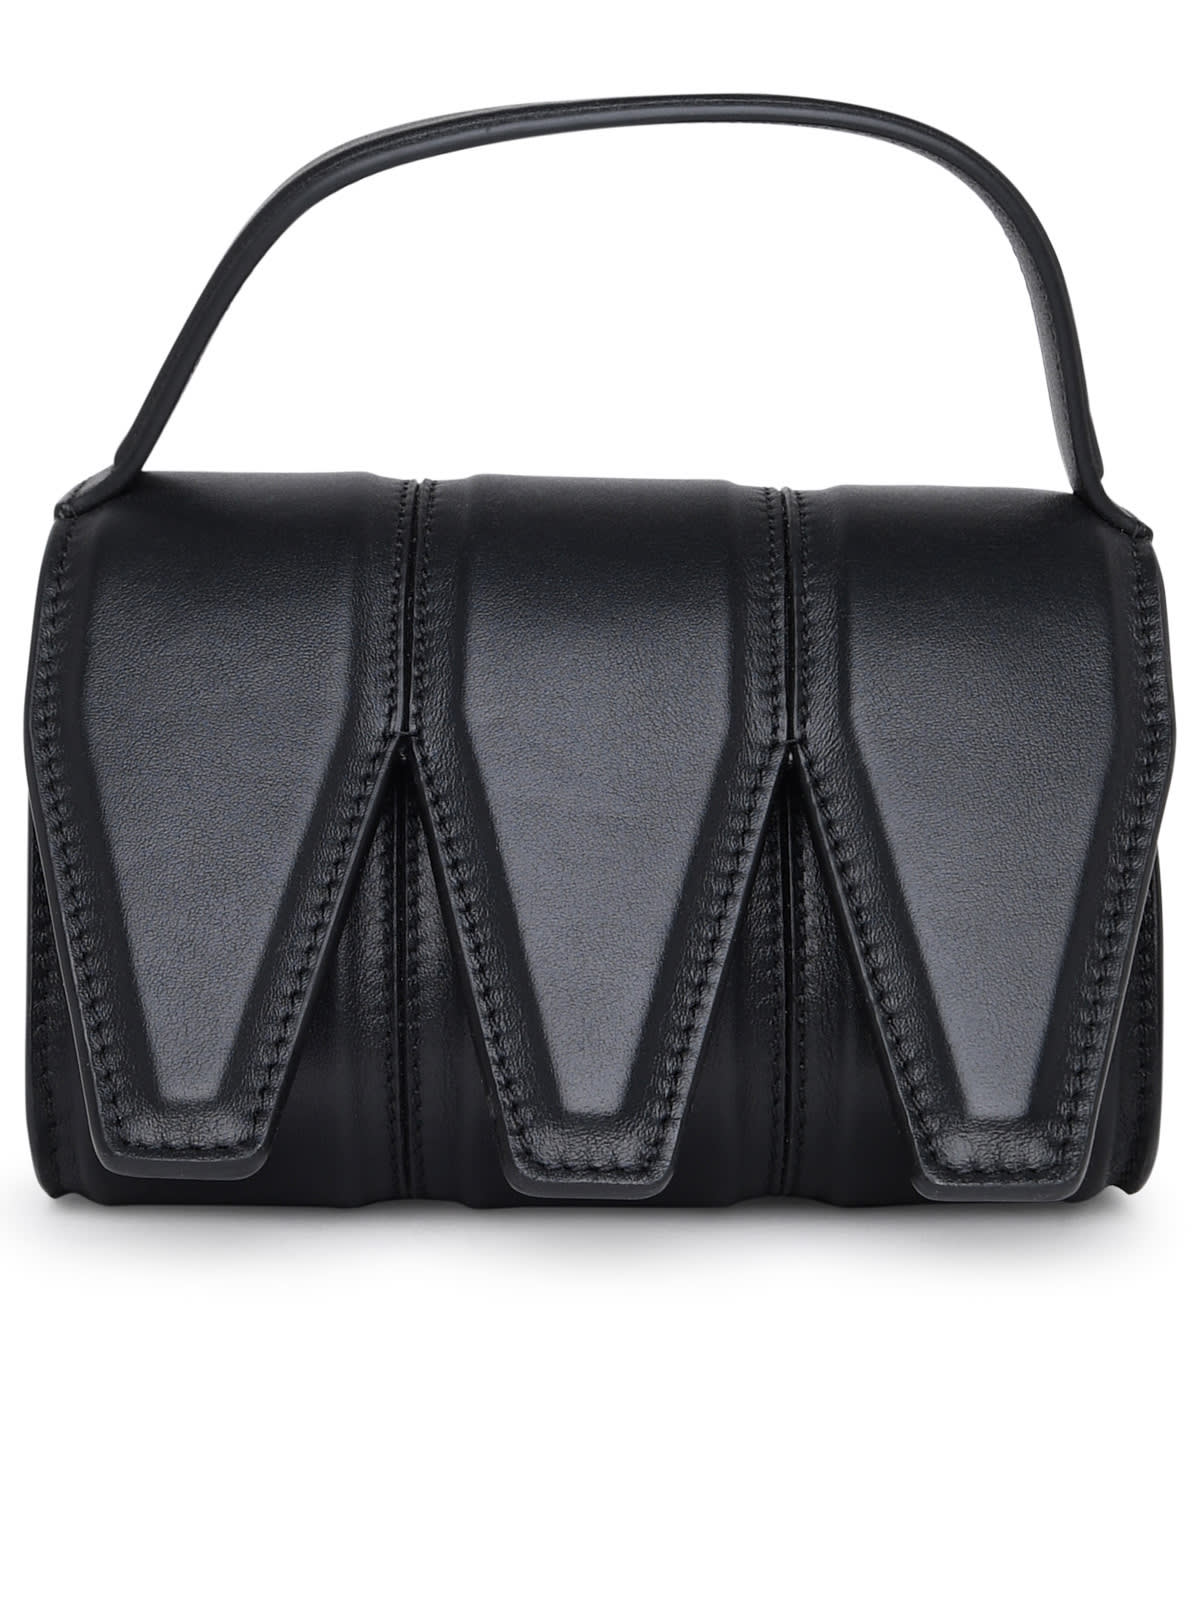 Three Bag In Black Leather